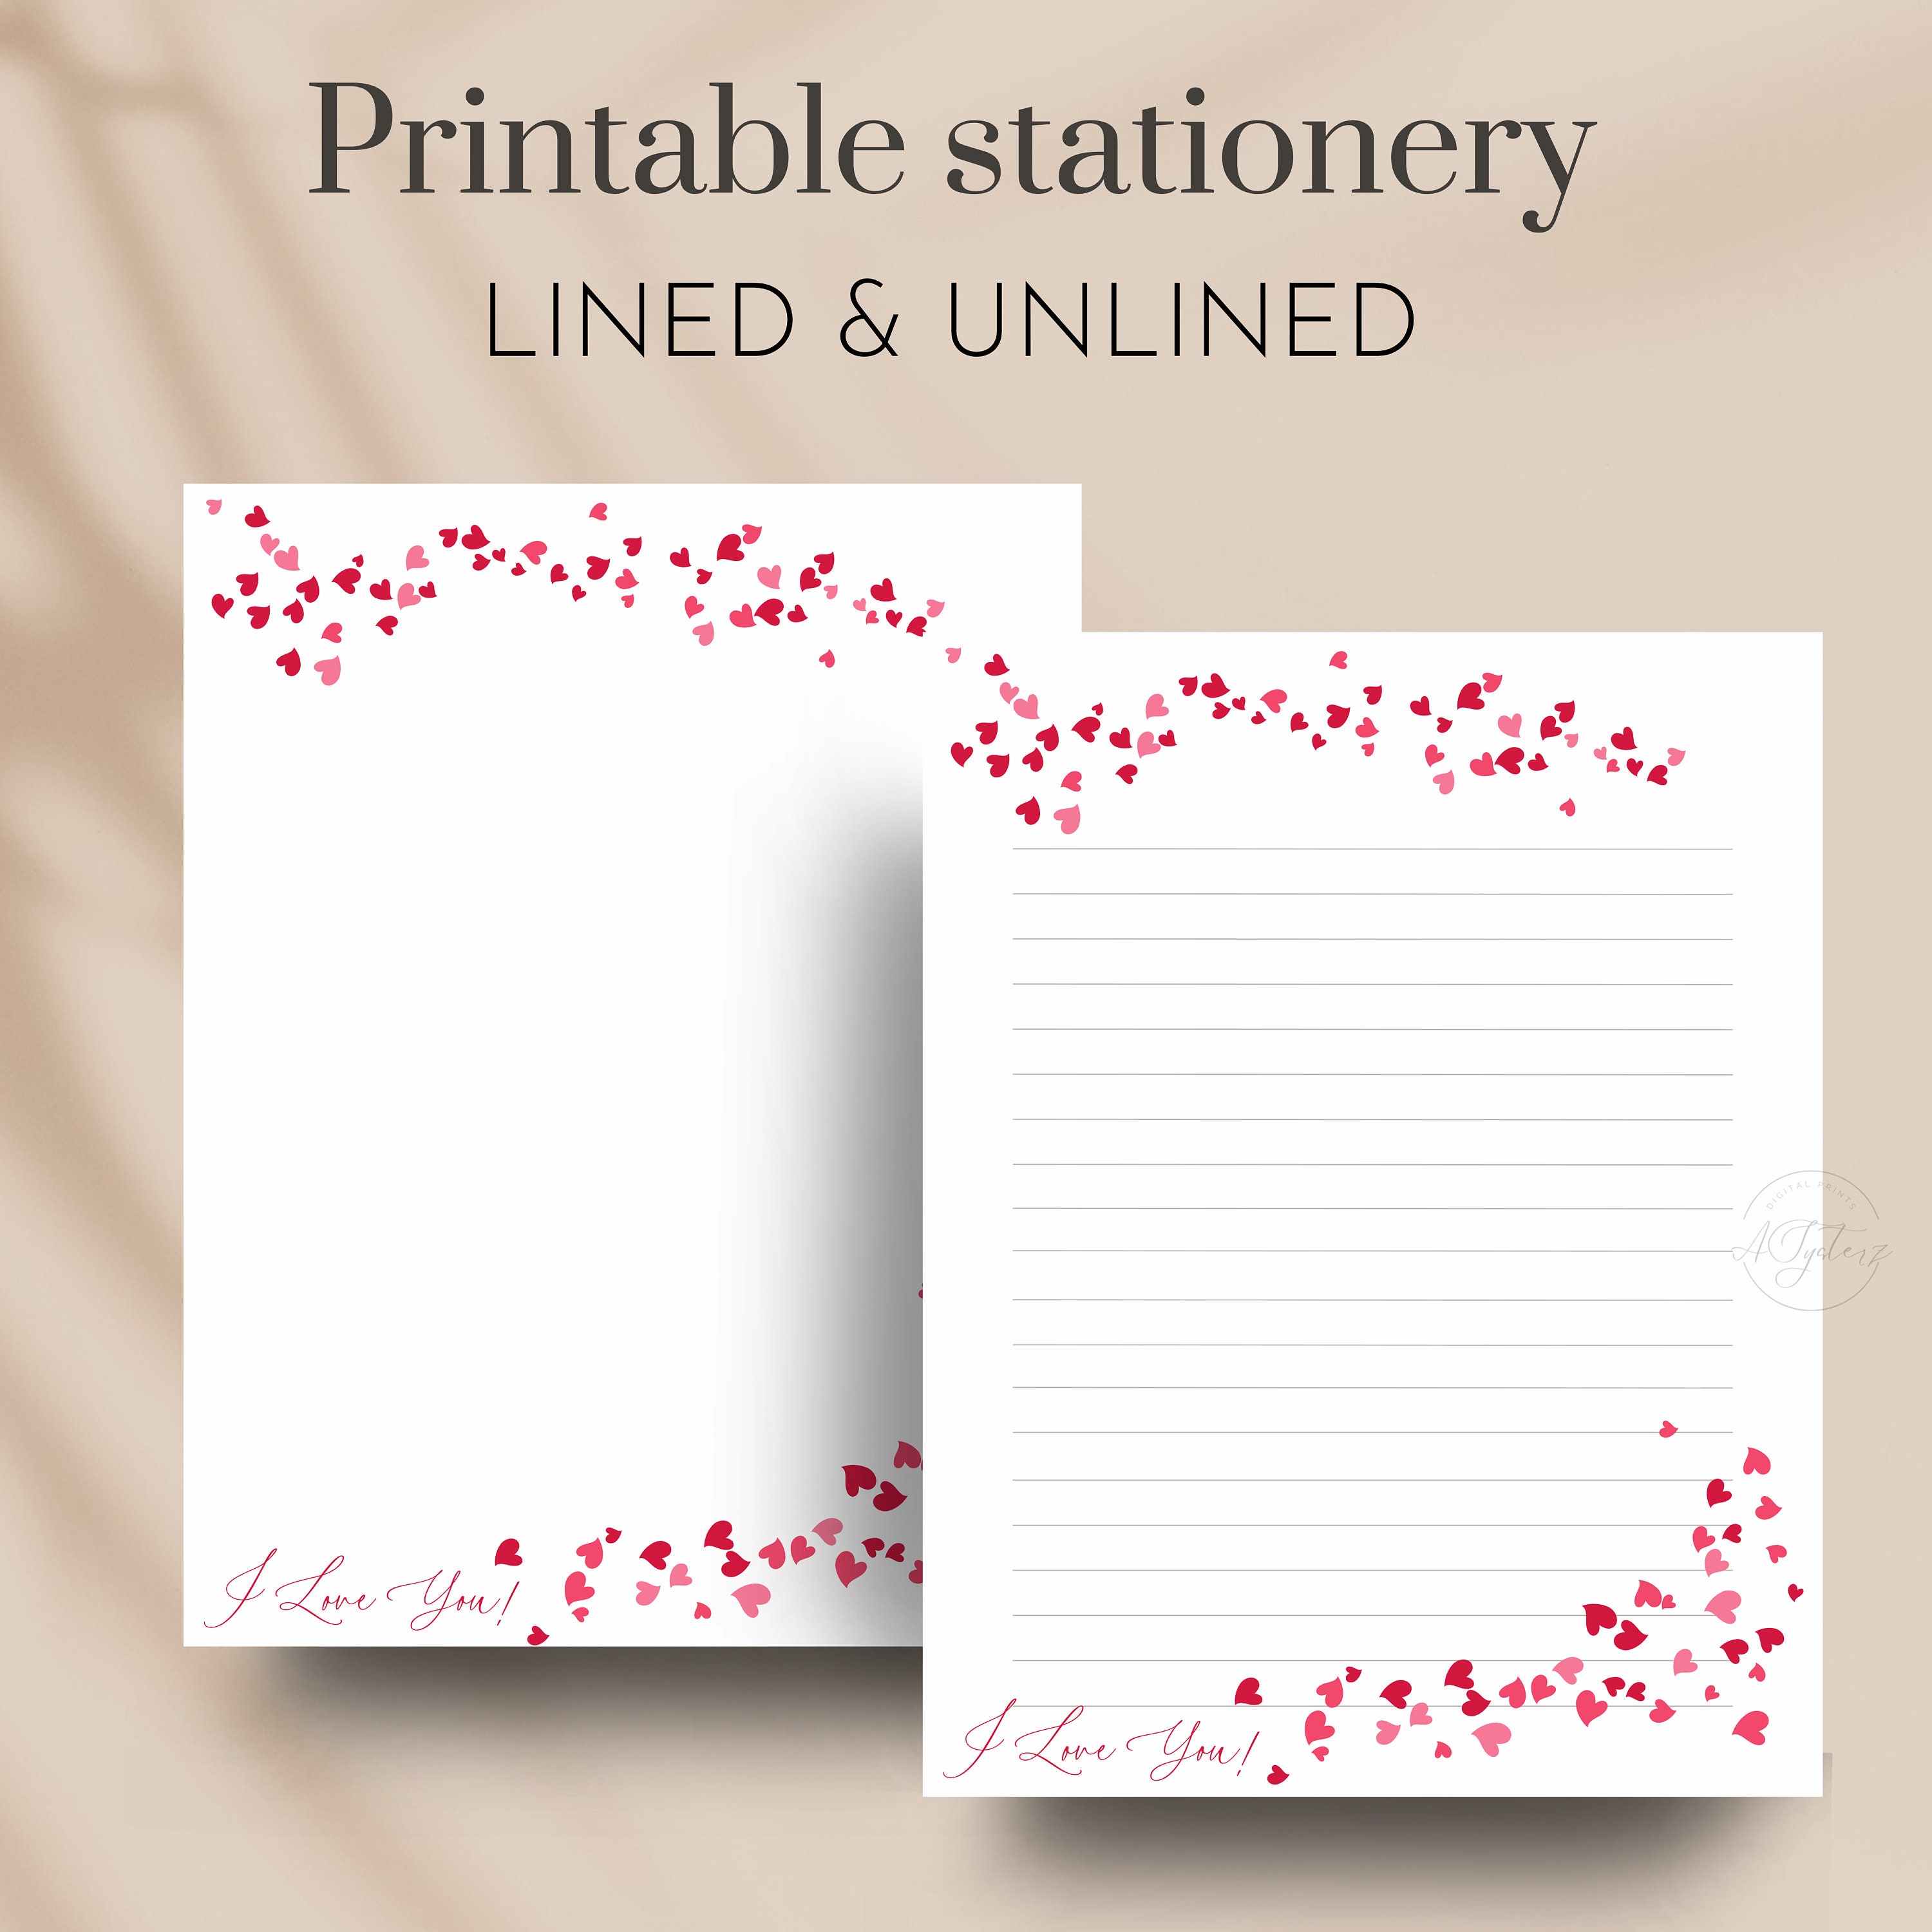 Free Romantic Stationery and Writing Paper